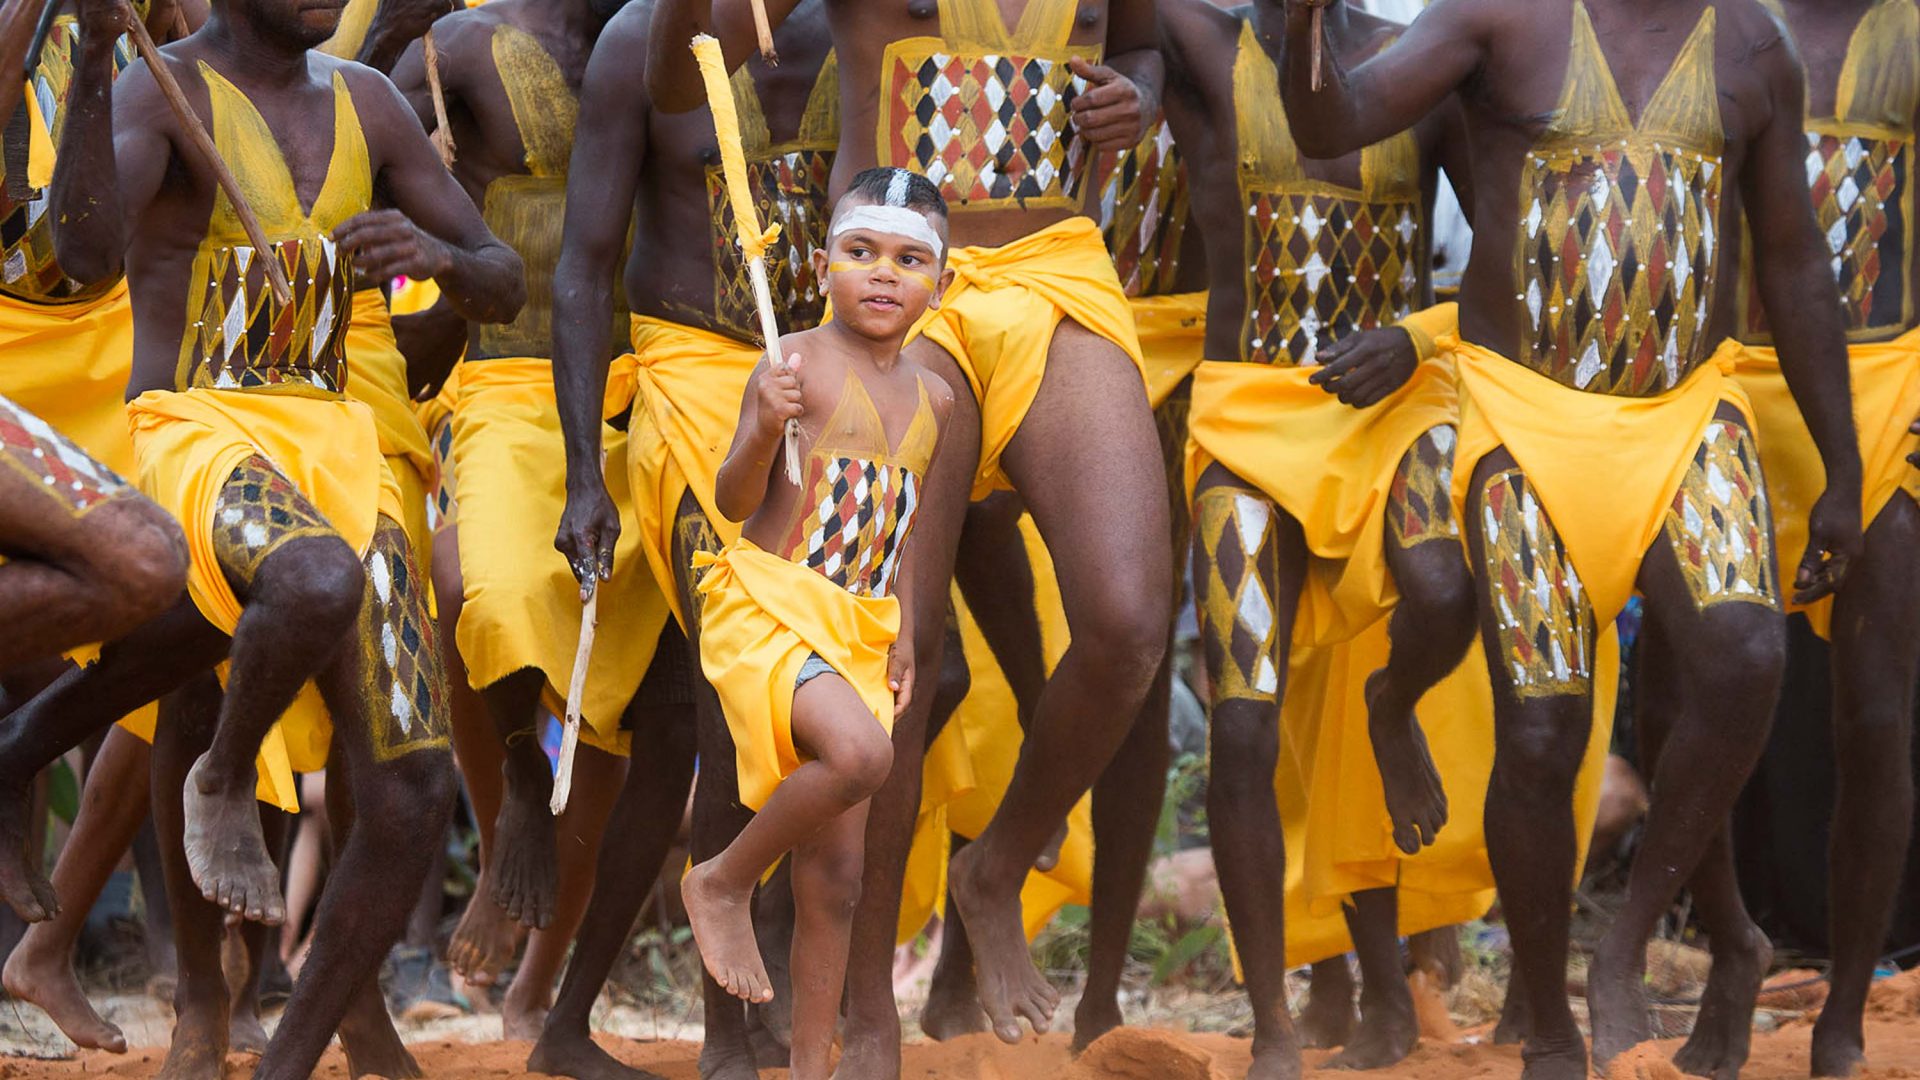 Looking for an education on Indigenous Australia? Start with these festivals